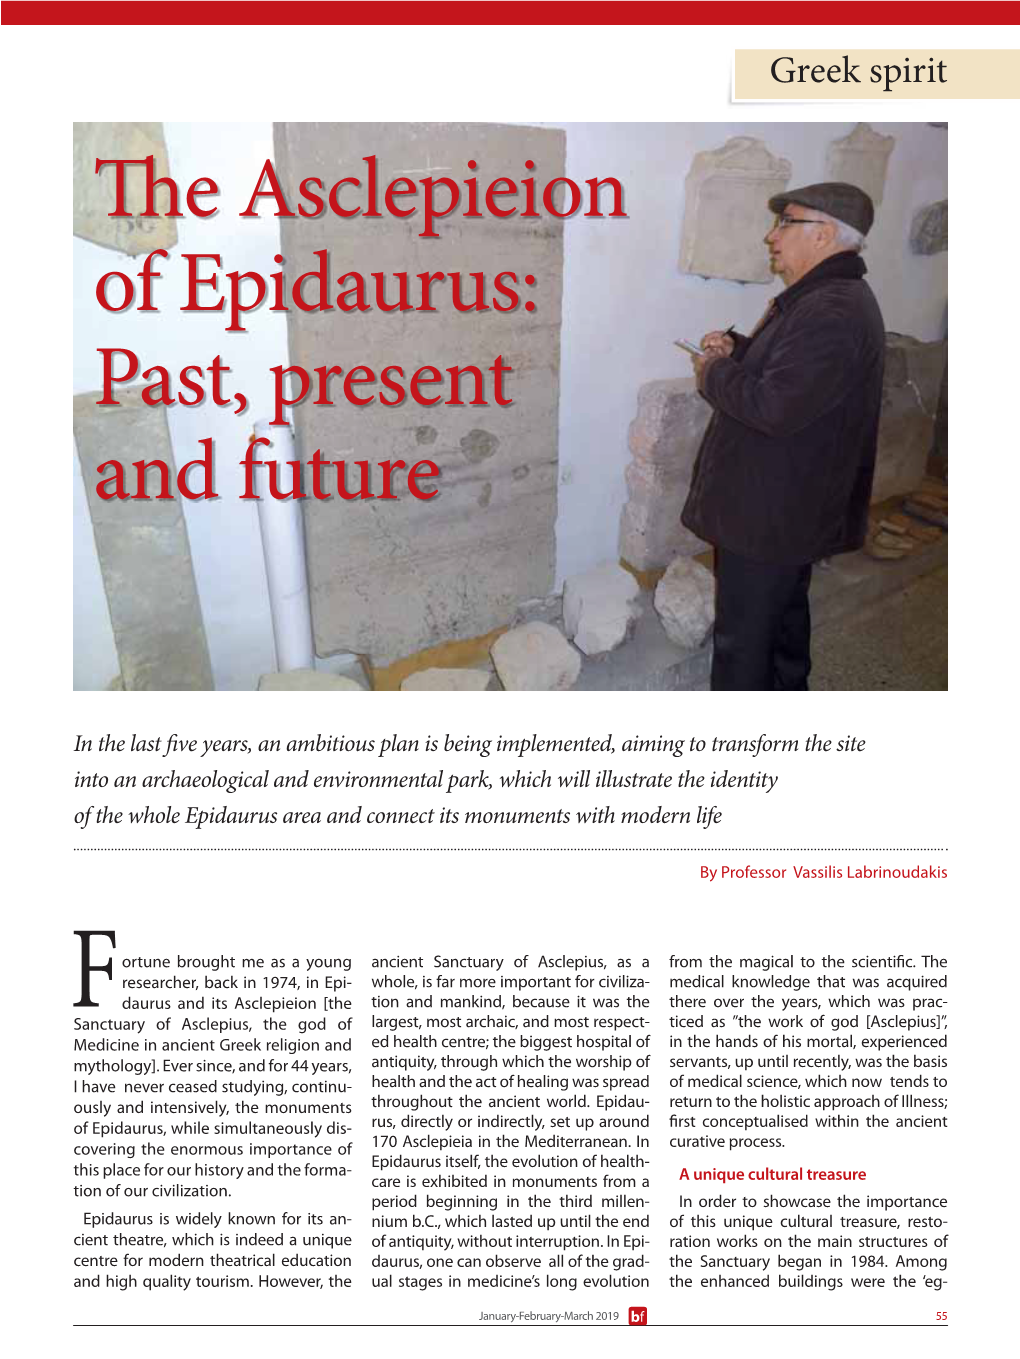 The Asclepieion of Epidaurus: Past, Present and Future